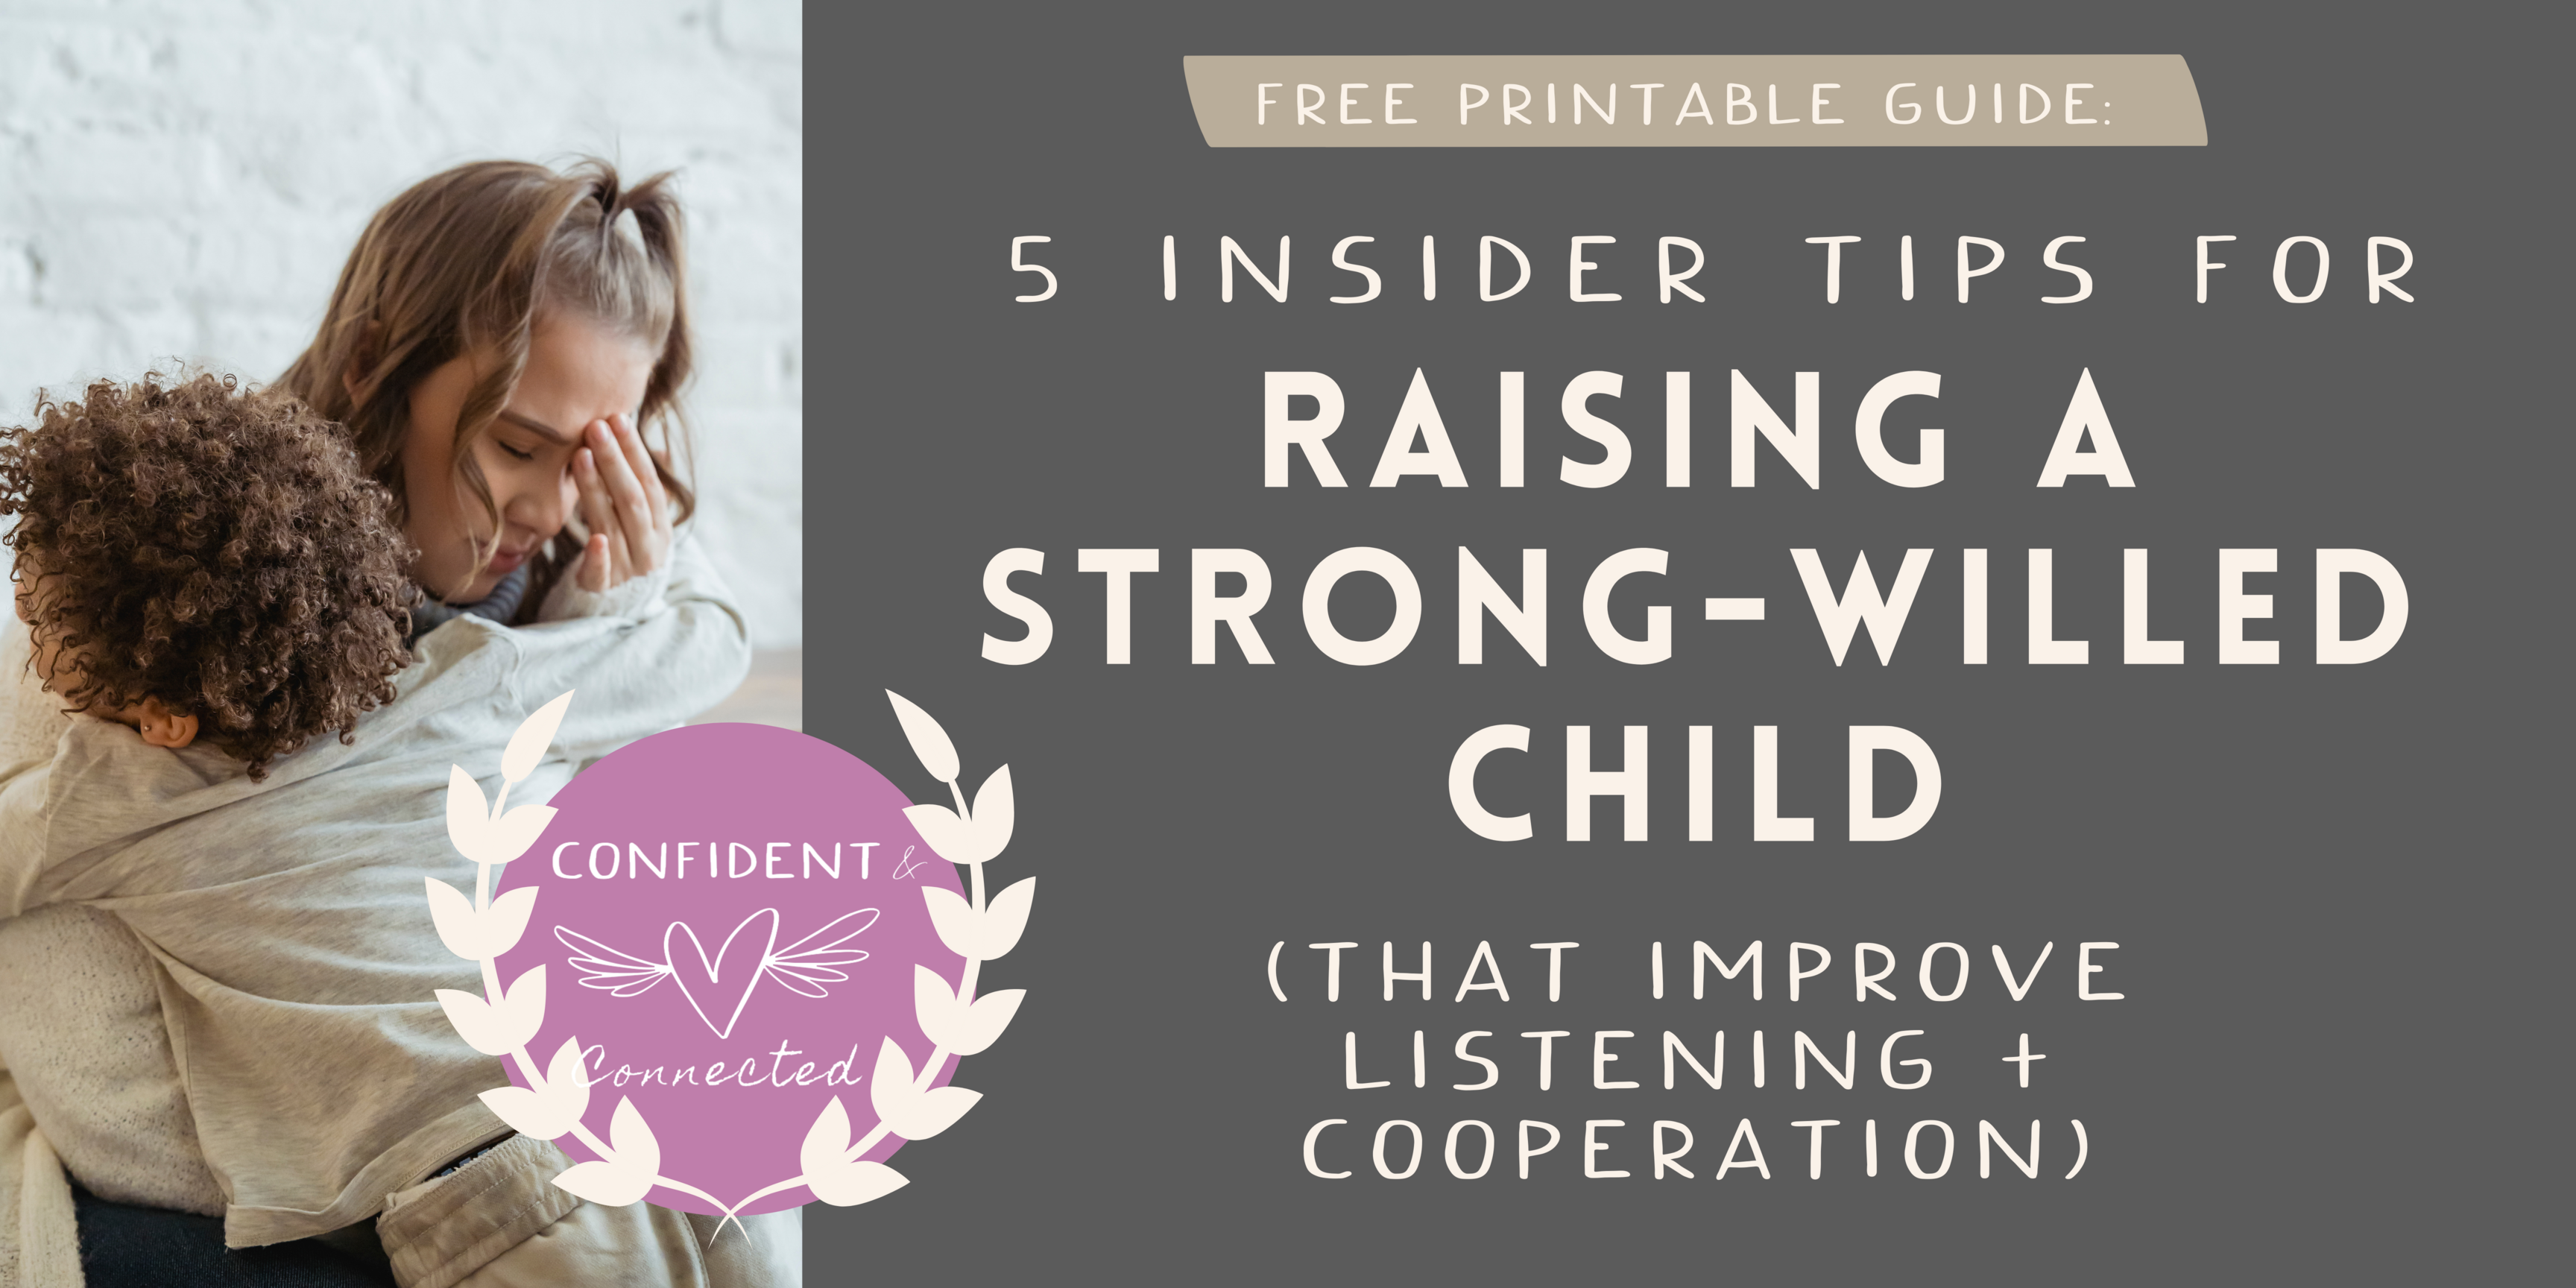 Guide for raising a strong willed child